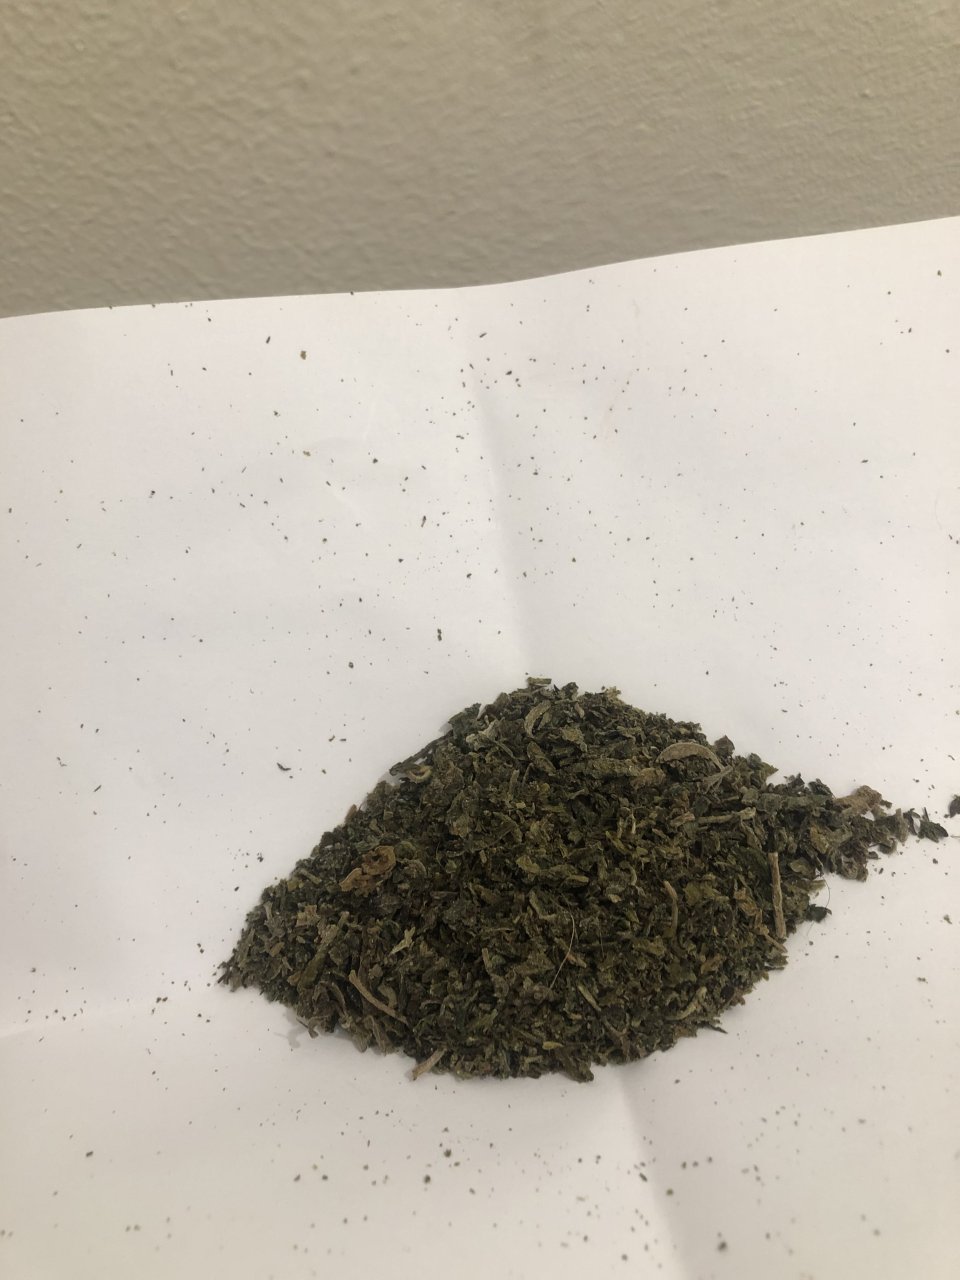 7 grams of decarbed weed